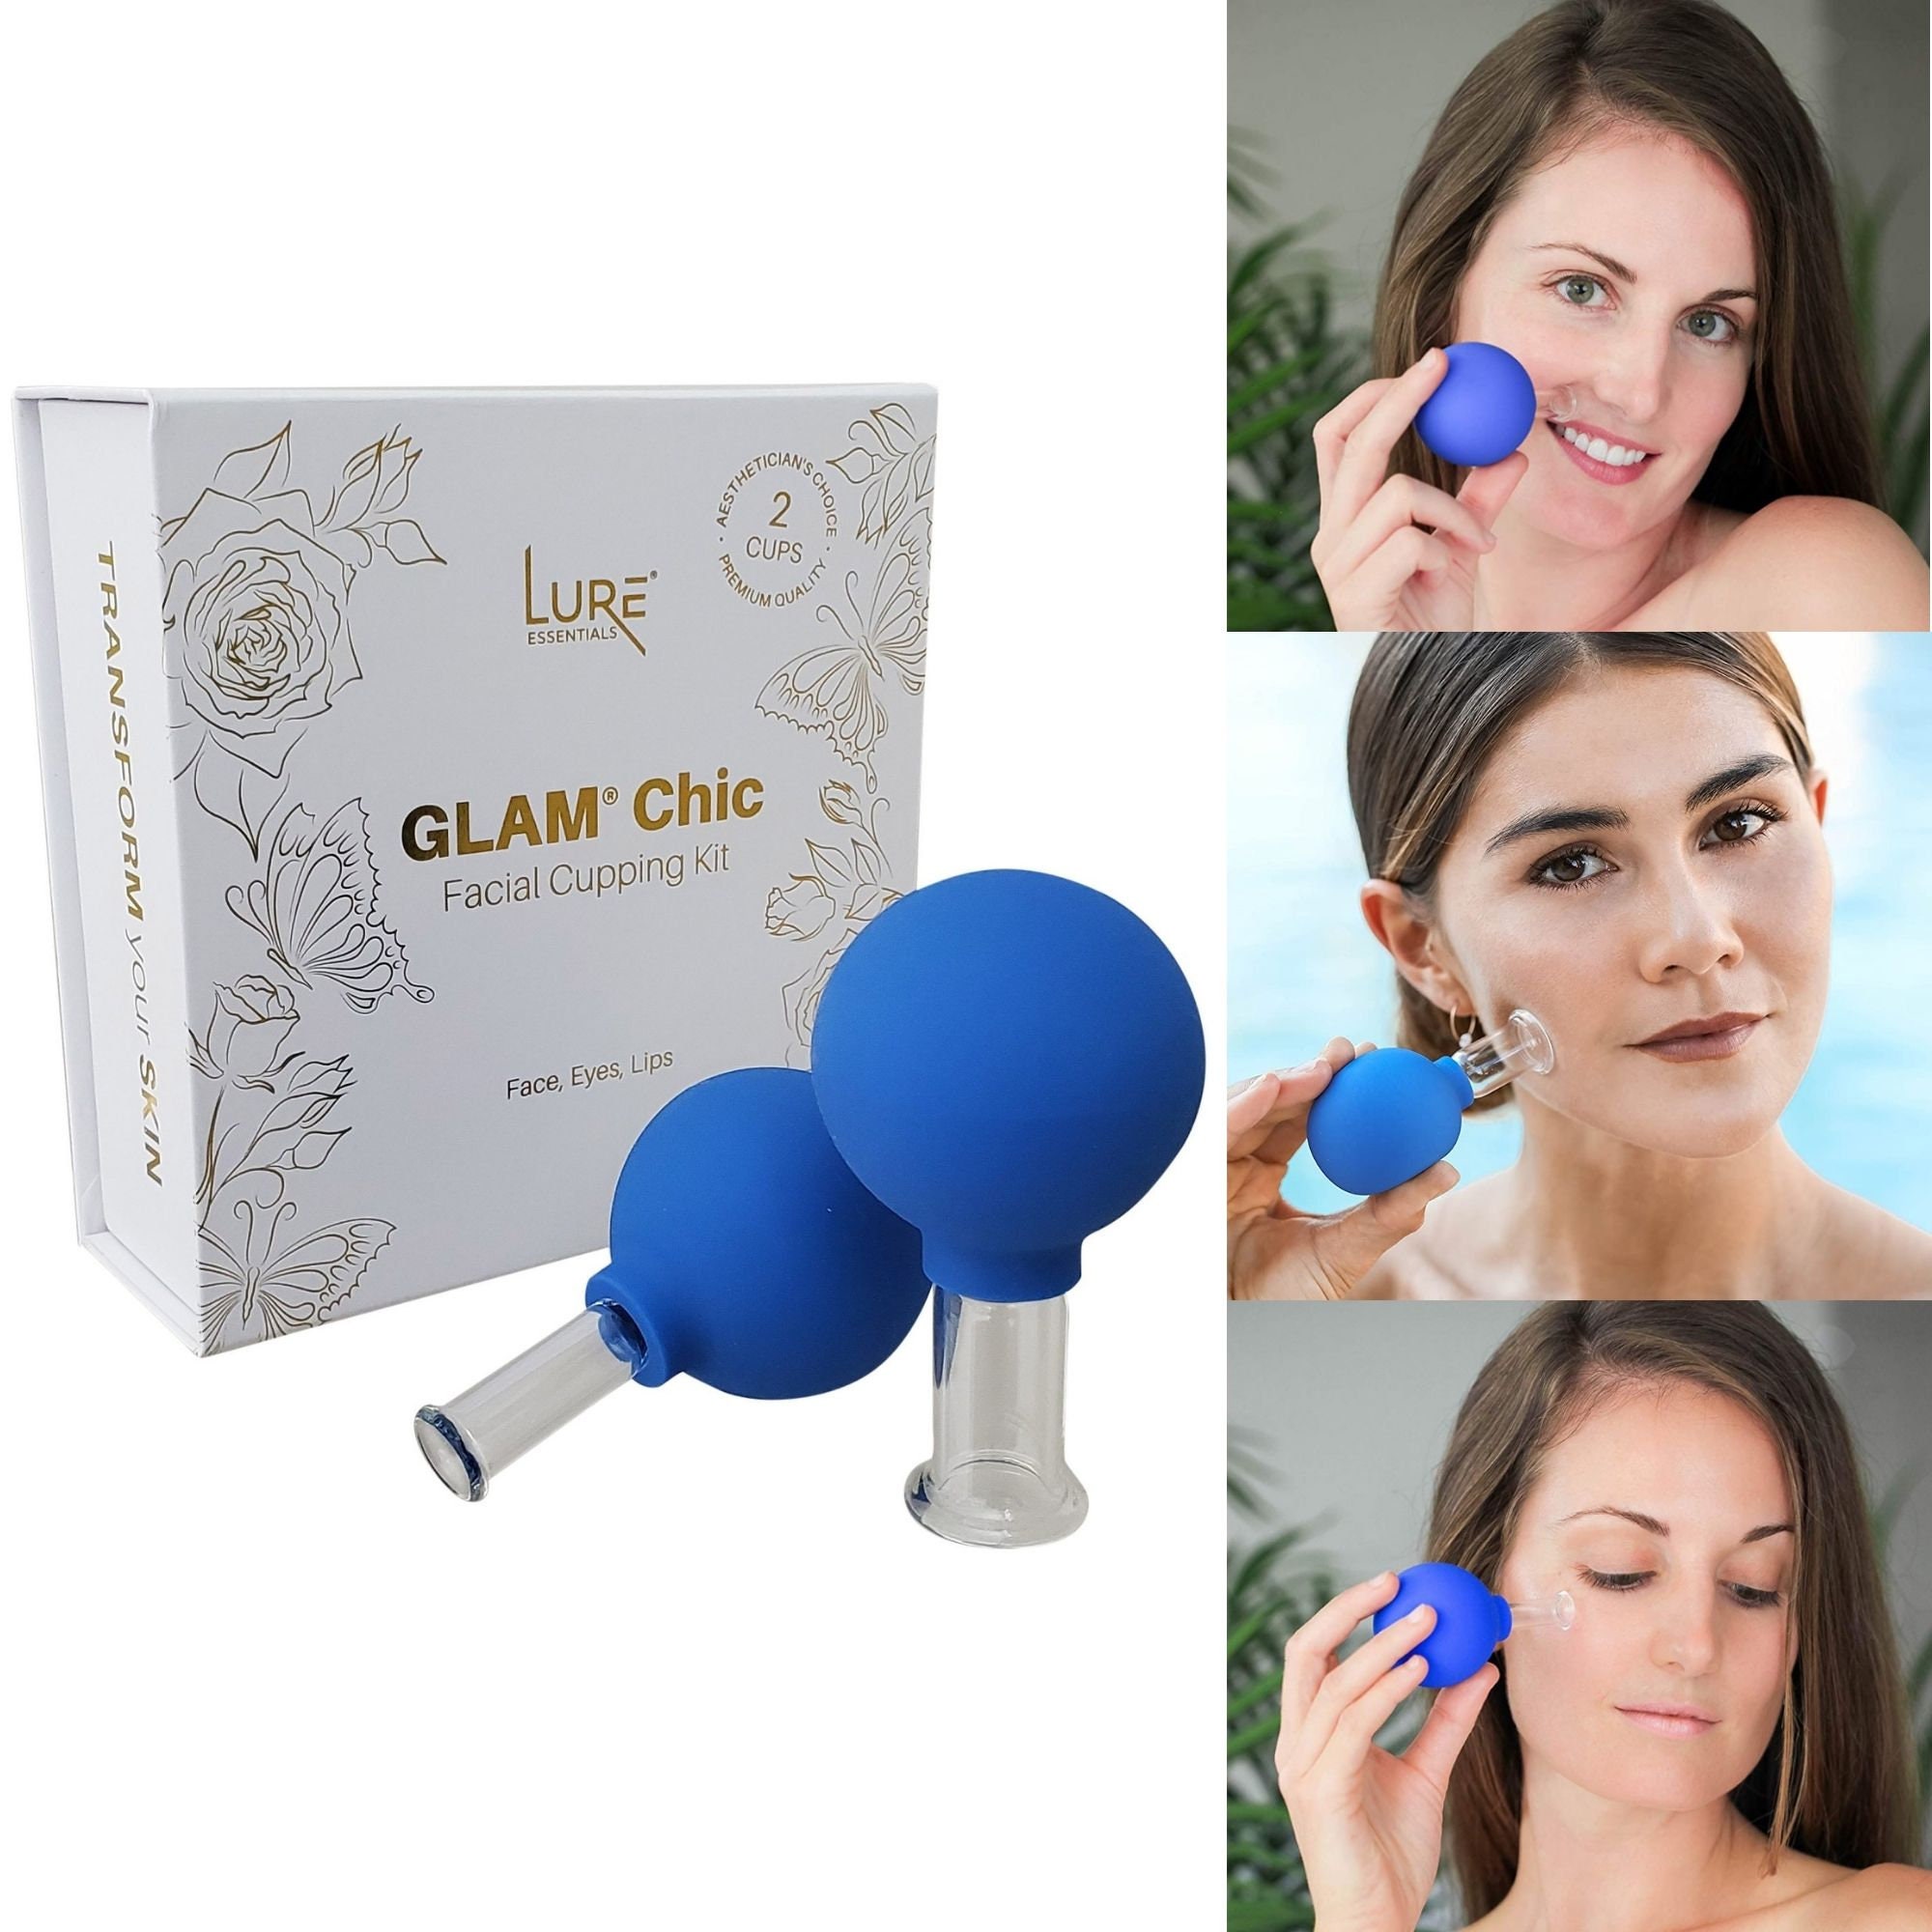 Glass Face Cupping Set FREE Shipping Blue Set of 2 